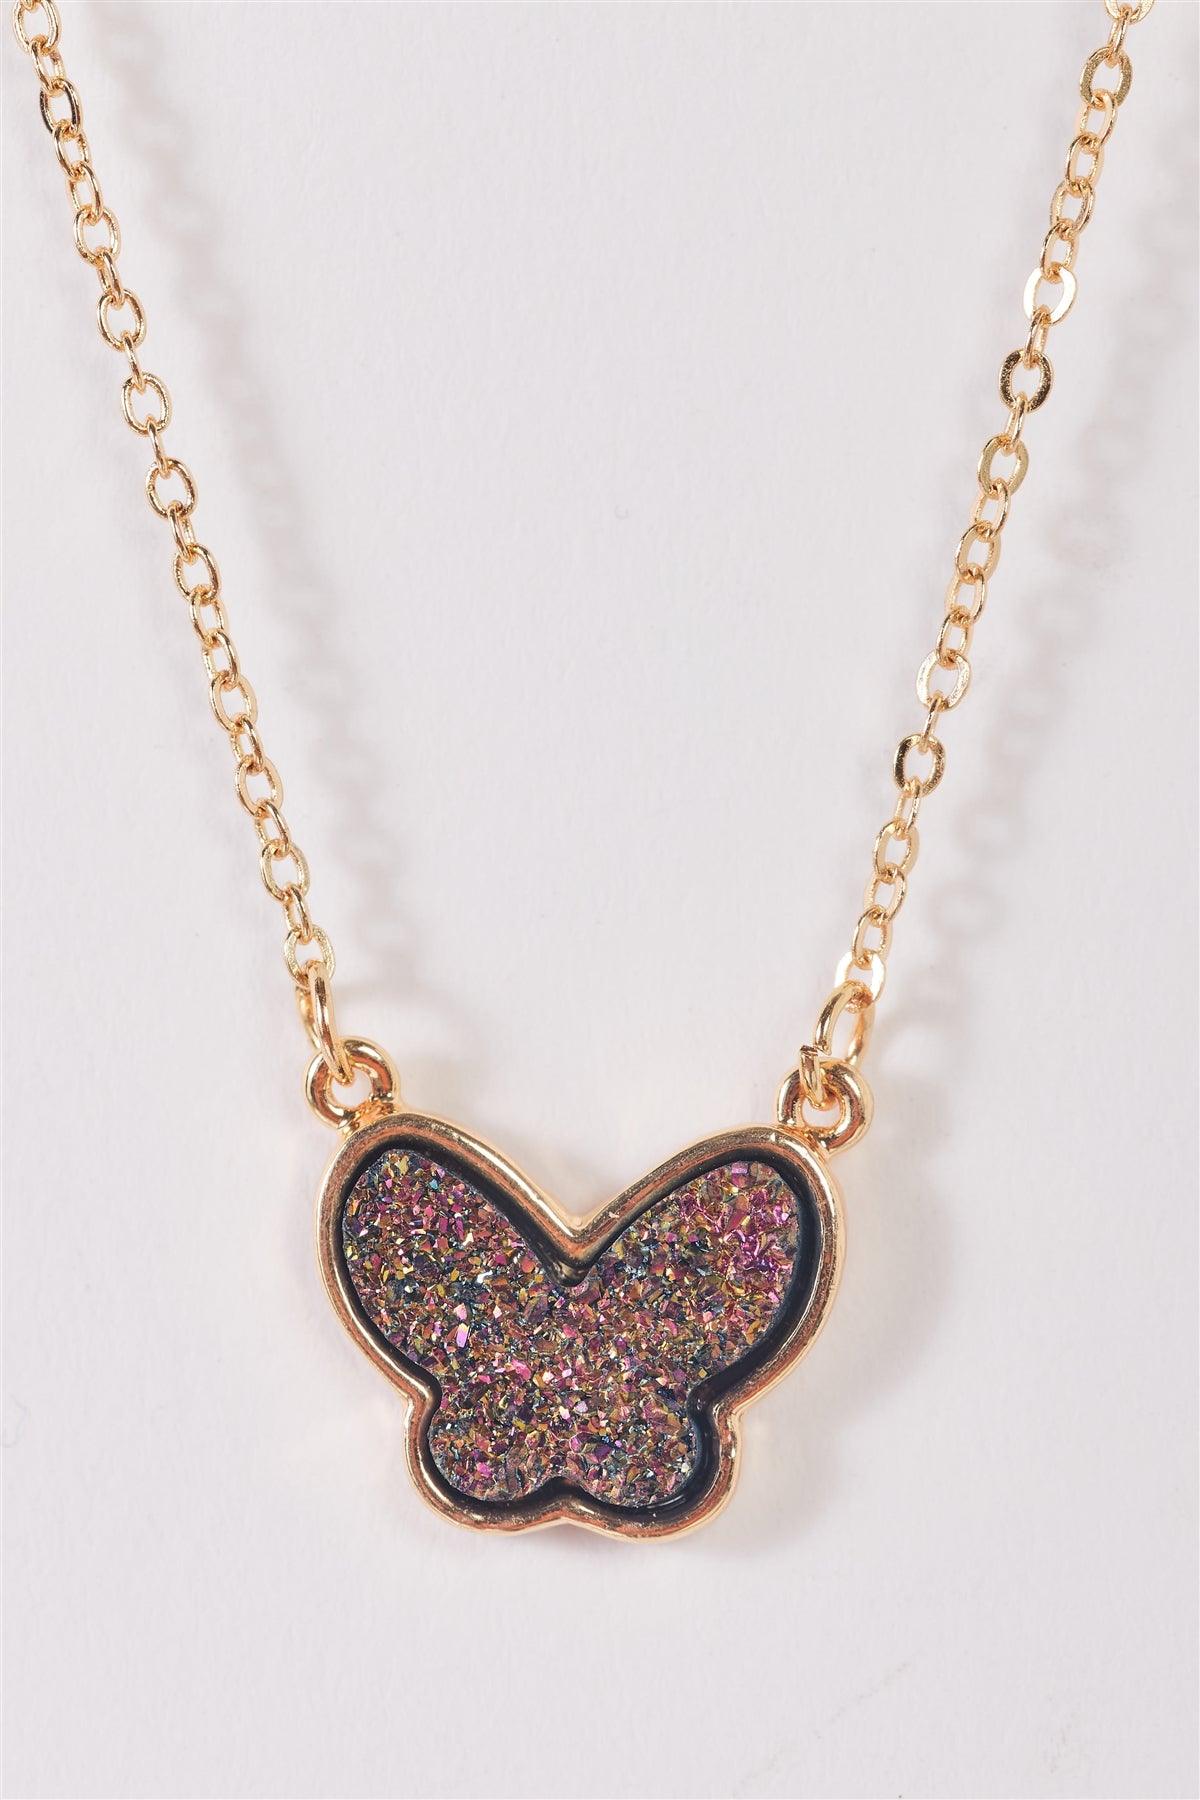 Gold Link Chain With Multi Color Glitter Butterfly Pendant Necklace /3 Pieces